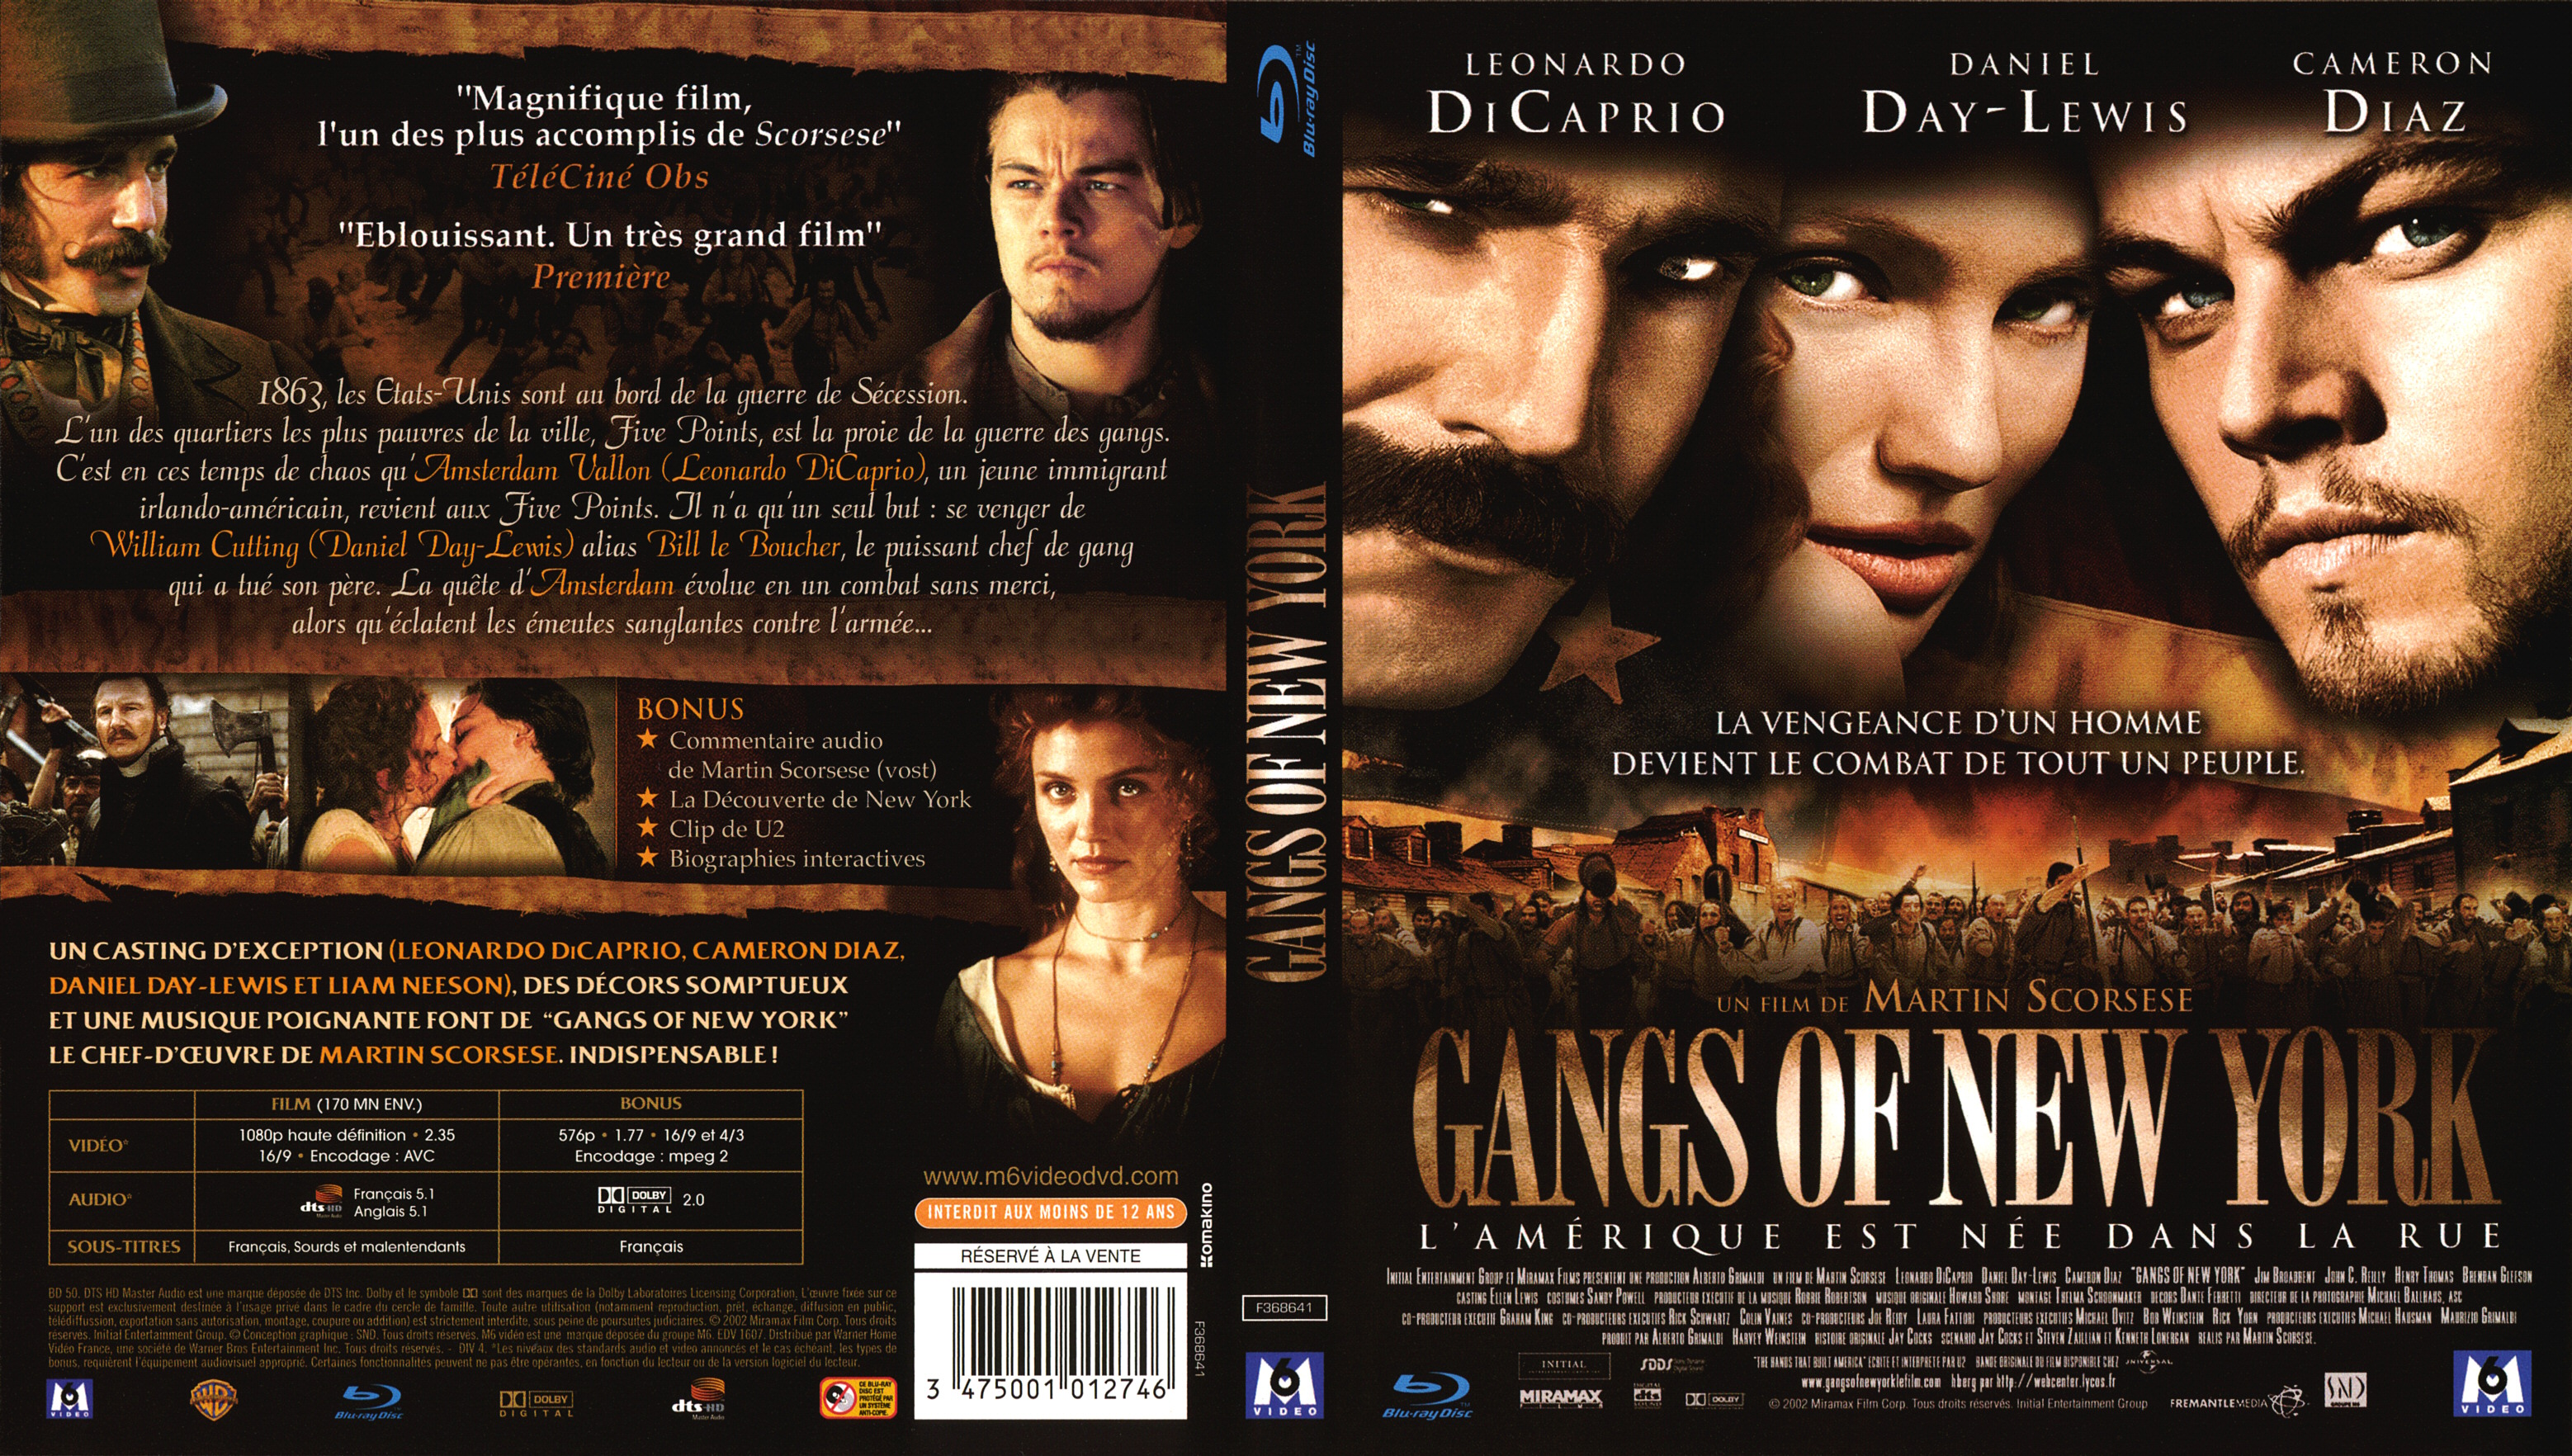 Jaquette DVD Gangs of New York (BLU-RAY)